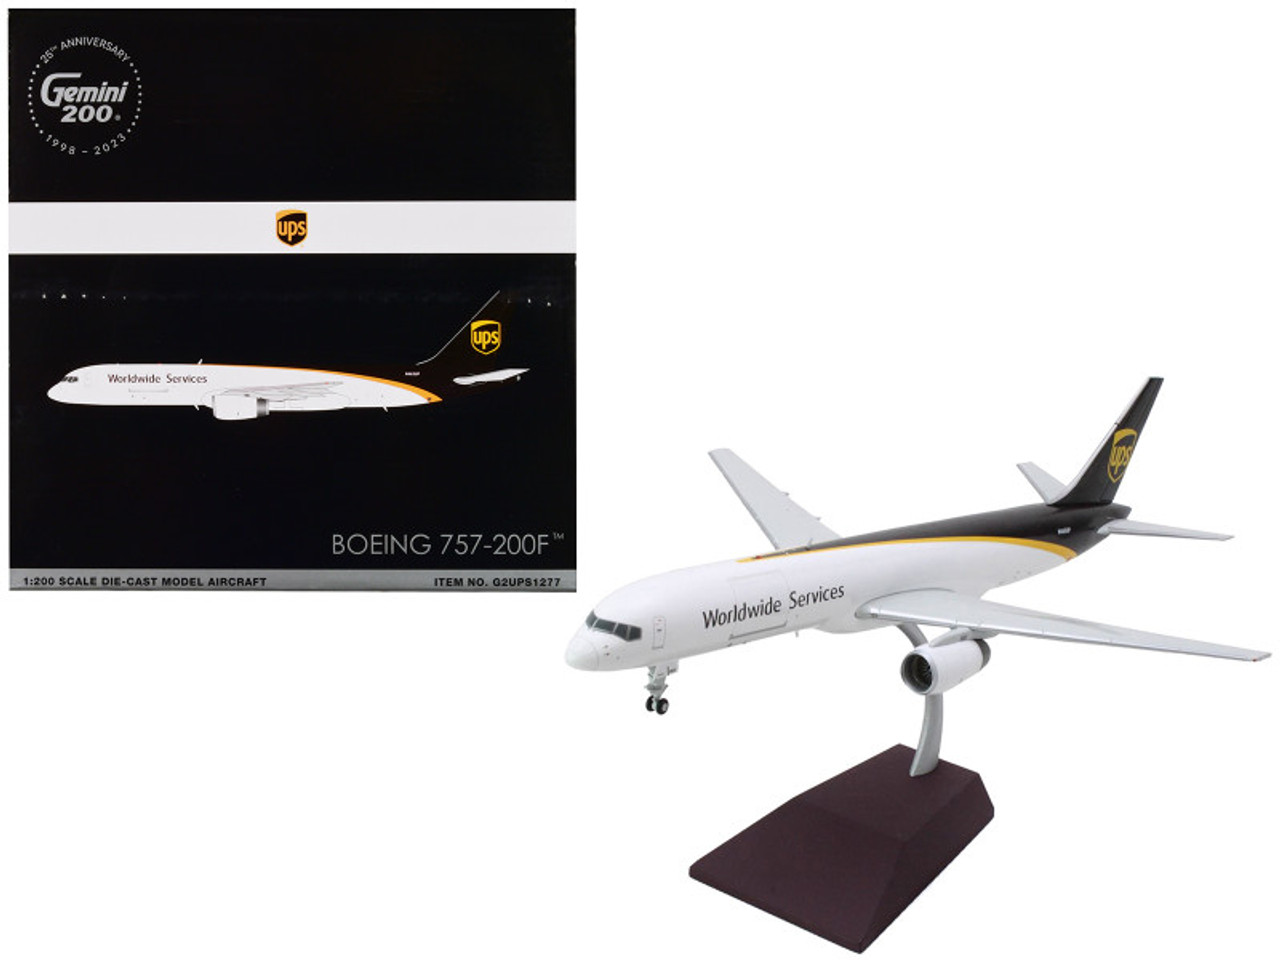 Boeing 757-200 Commercial Aircraft "UPS Worldwide Services" (N465UP) White with Brown Tail "Gemini 200" Series 1/200 Diecast Model Airplane by GeminiJets